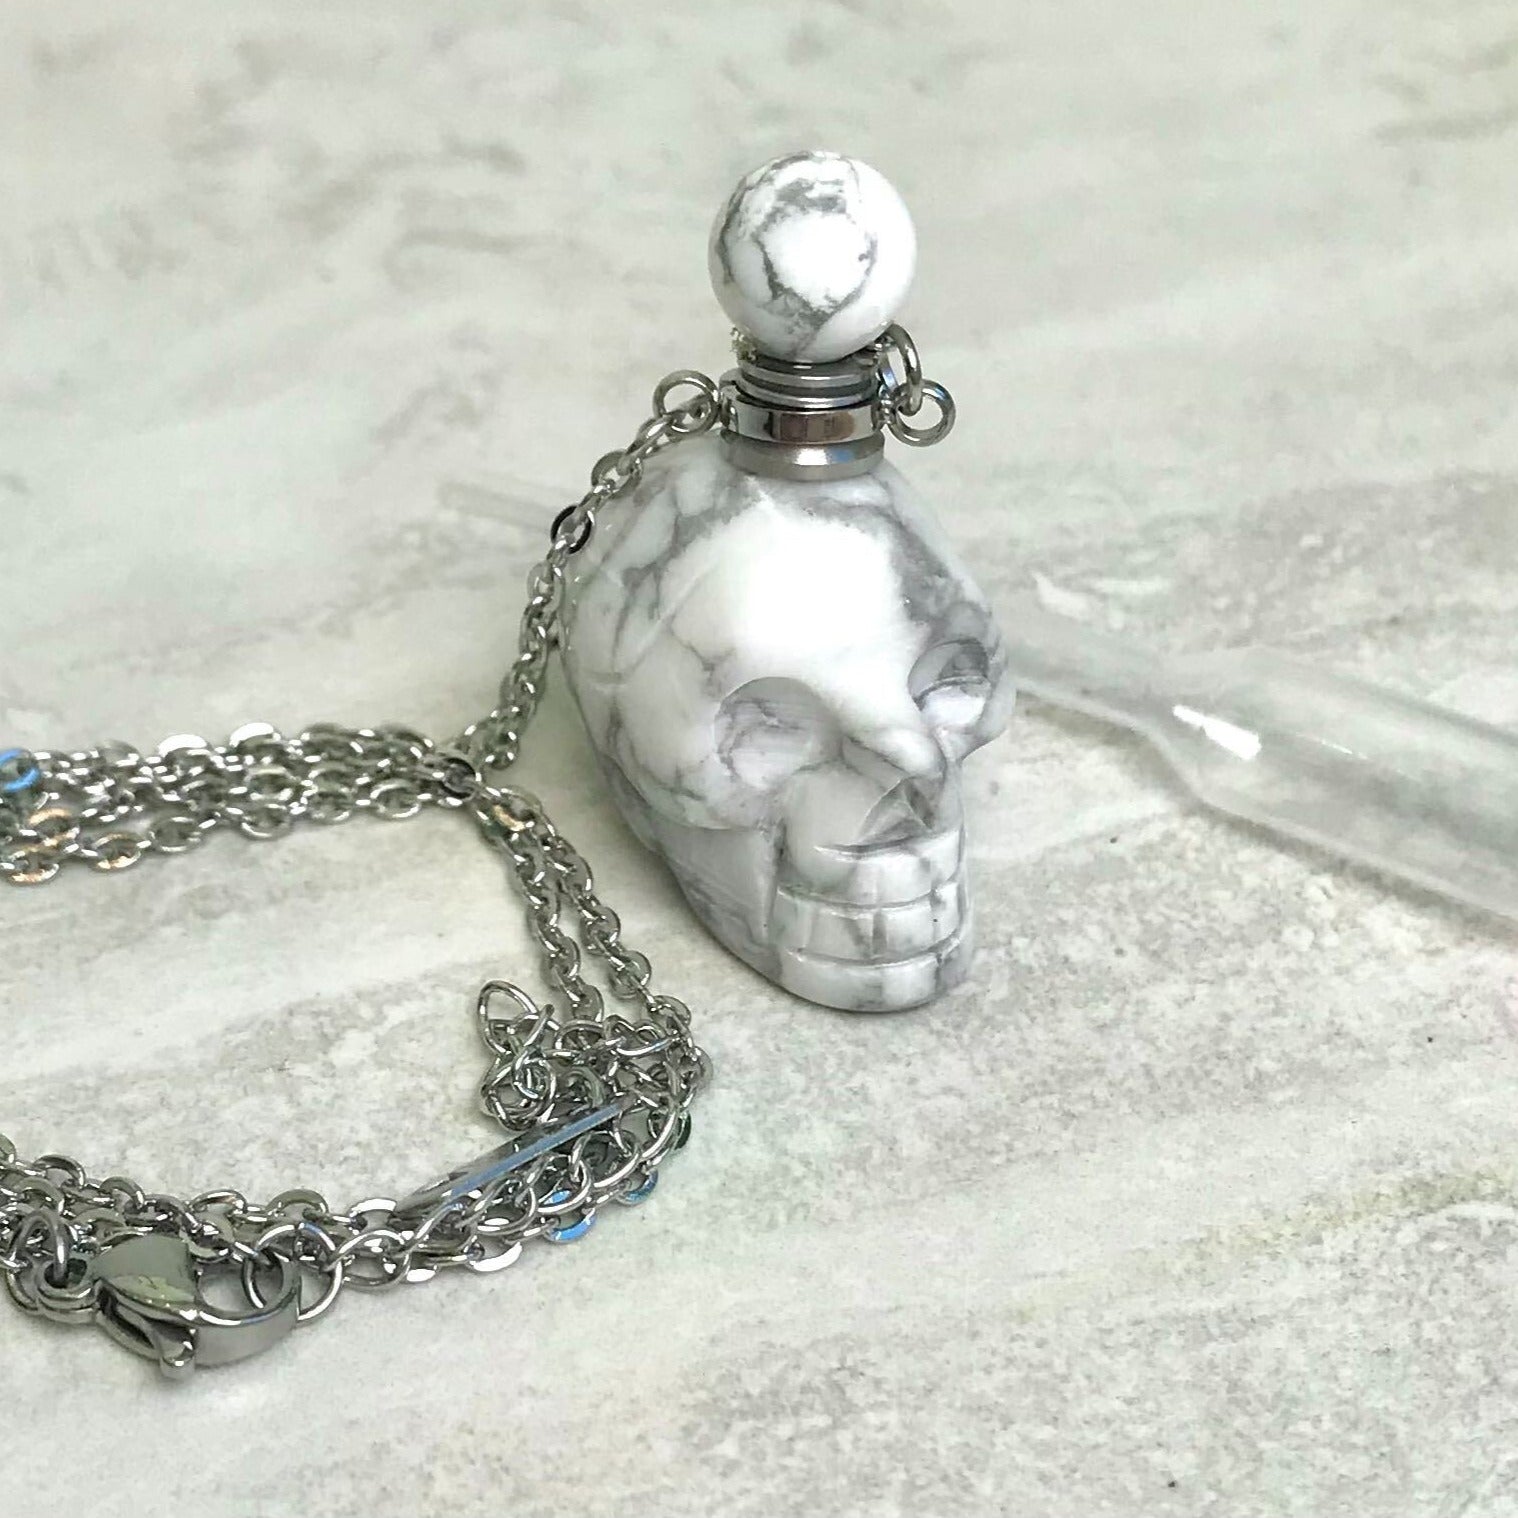 Crystal Skull Potion Bottle Necklace - Various Crystal Options